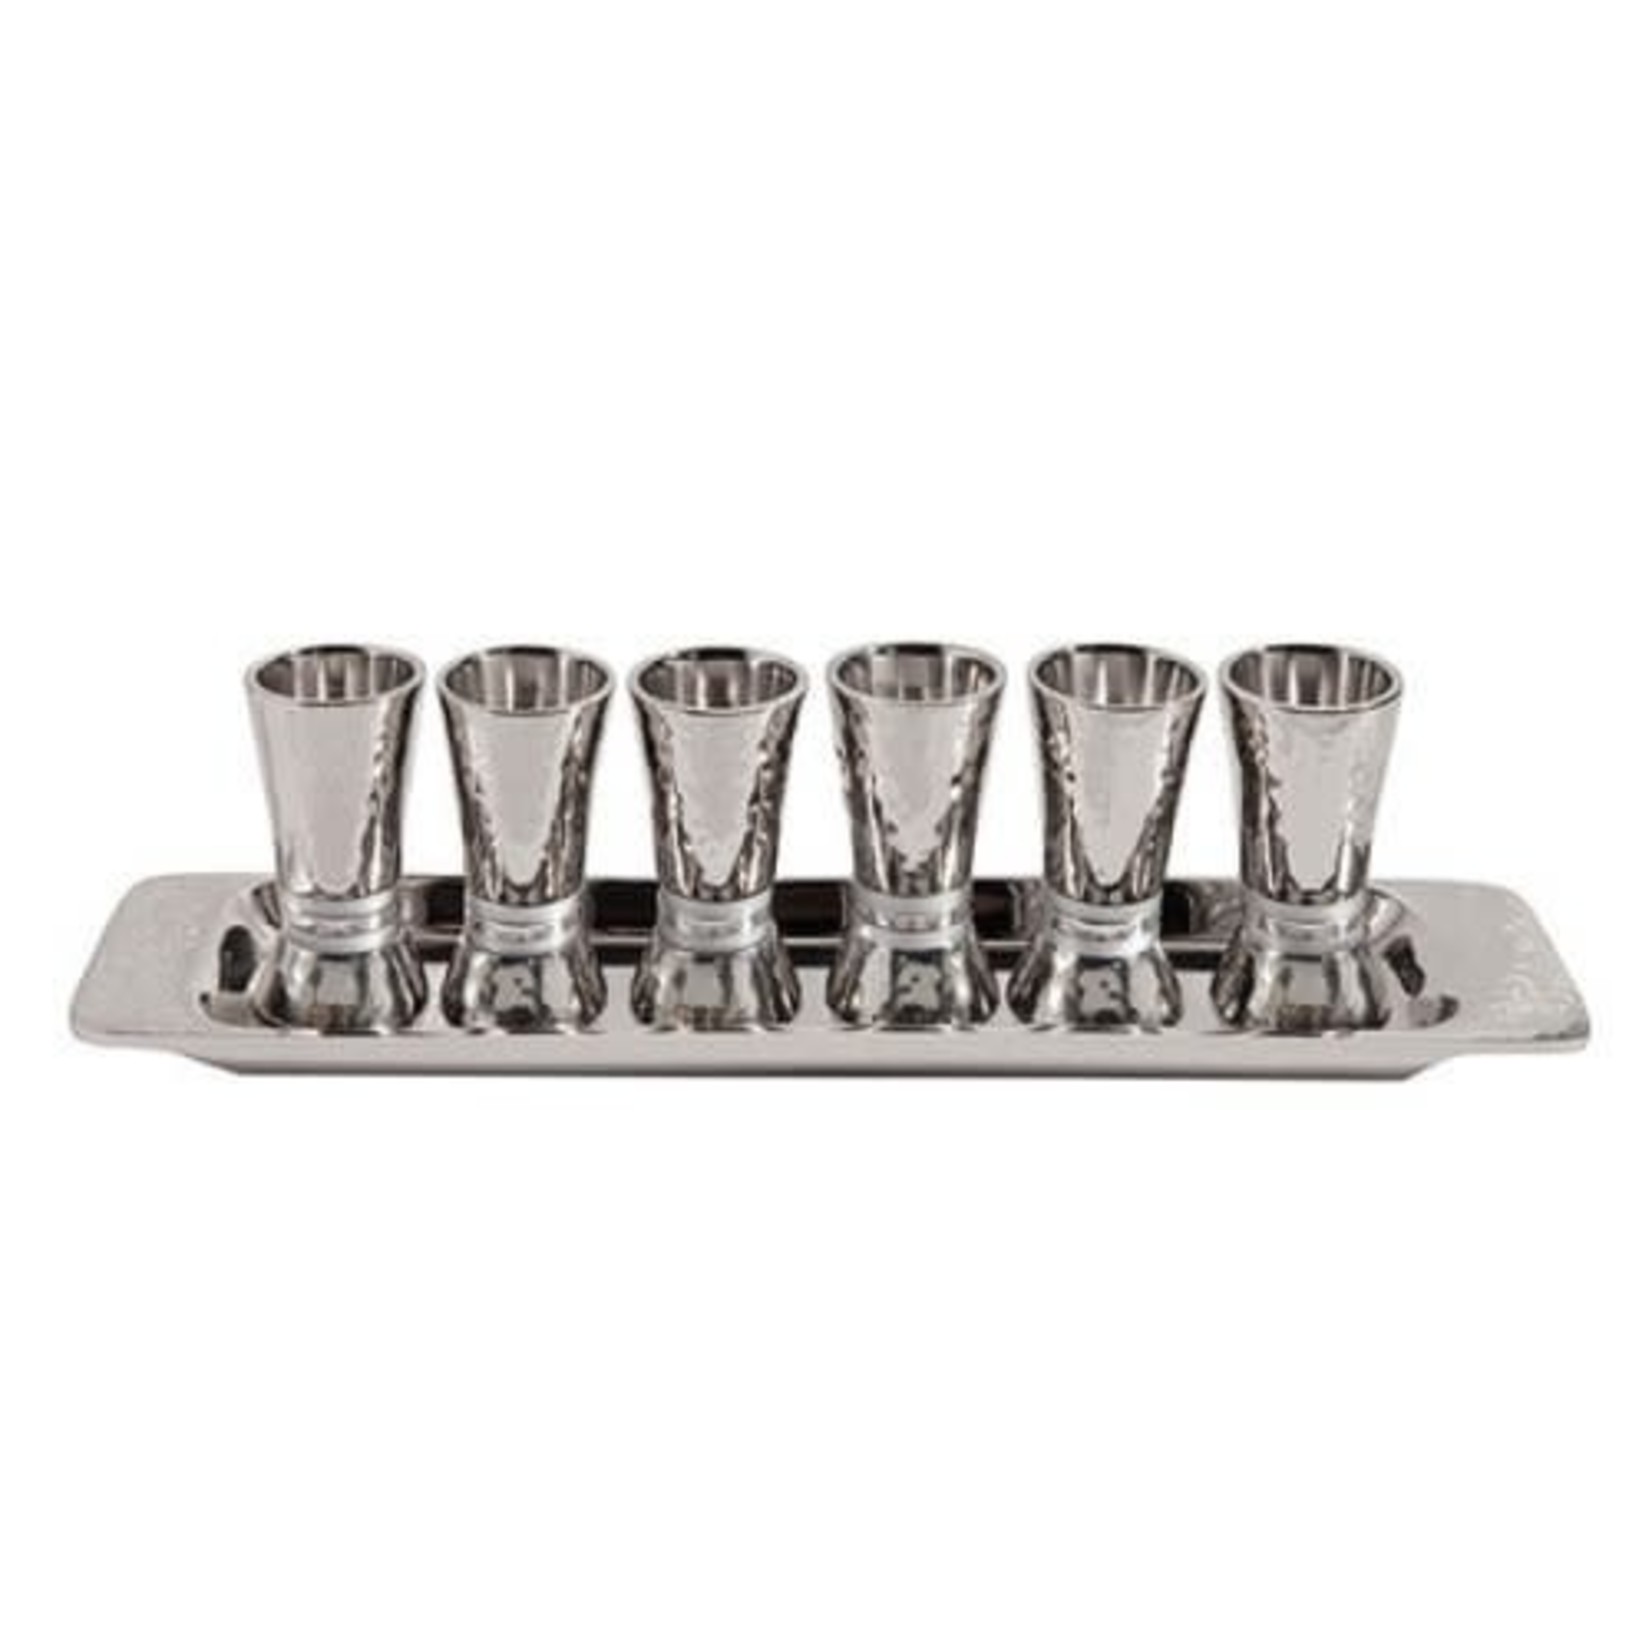 Hammered Conical Shaped Liquor Cups Set of 6- Silver Rings